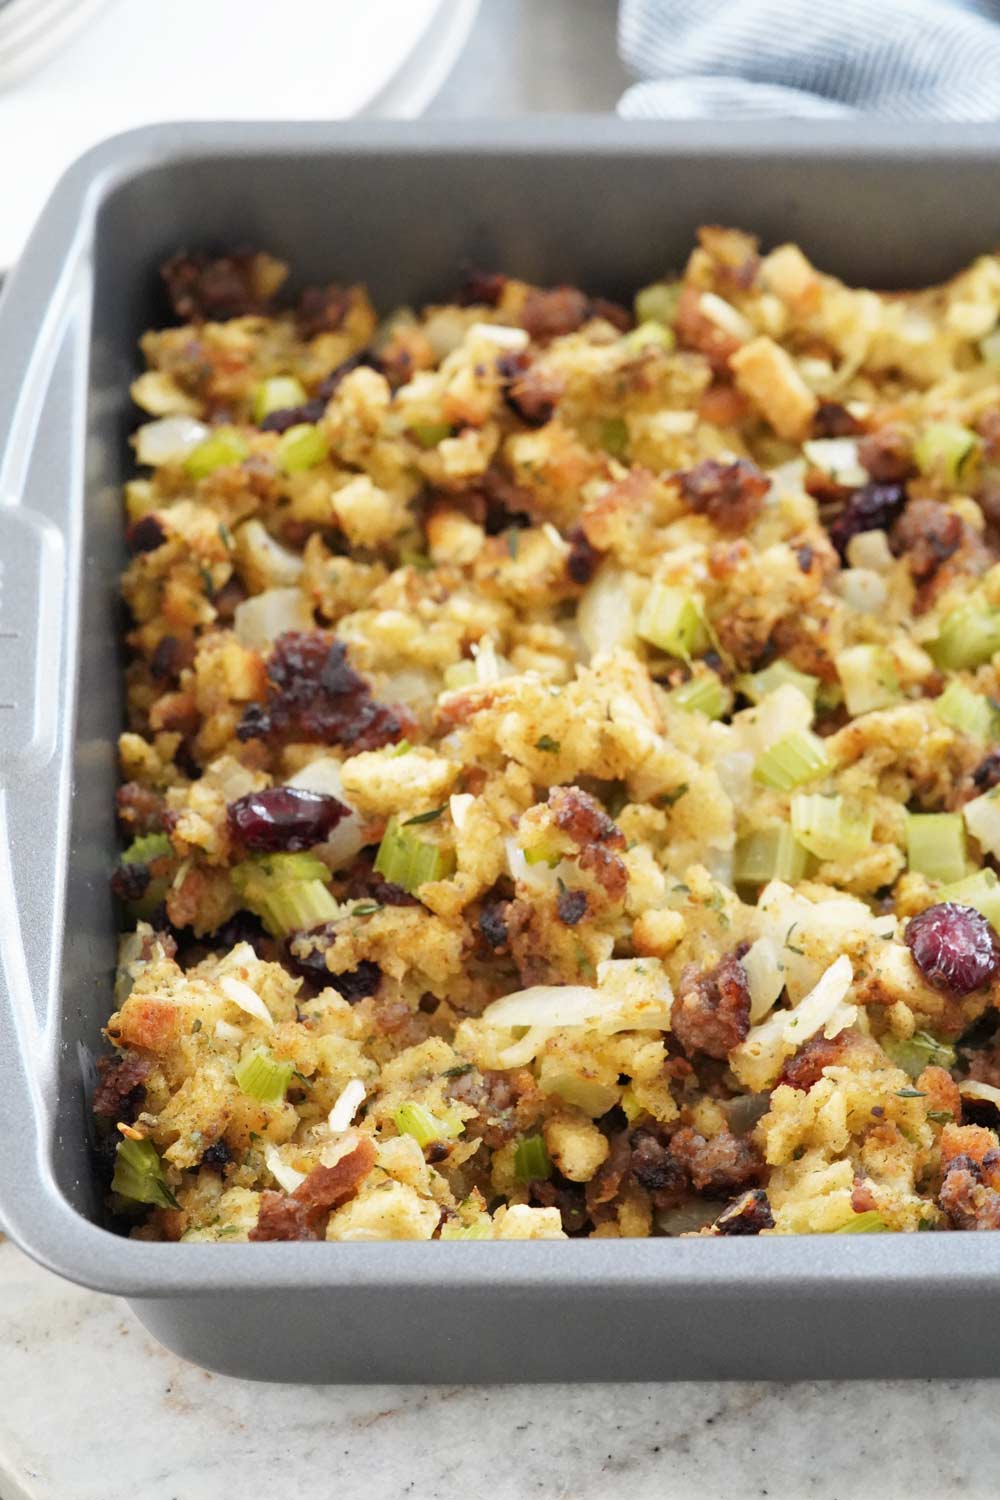 Smoked stuffing with sausage in a casserole dish.